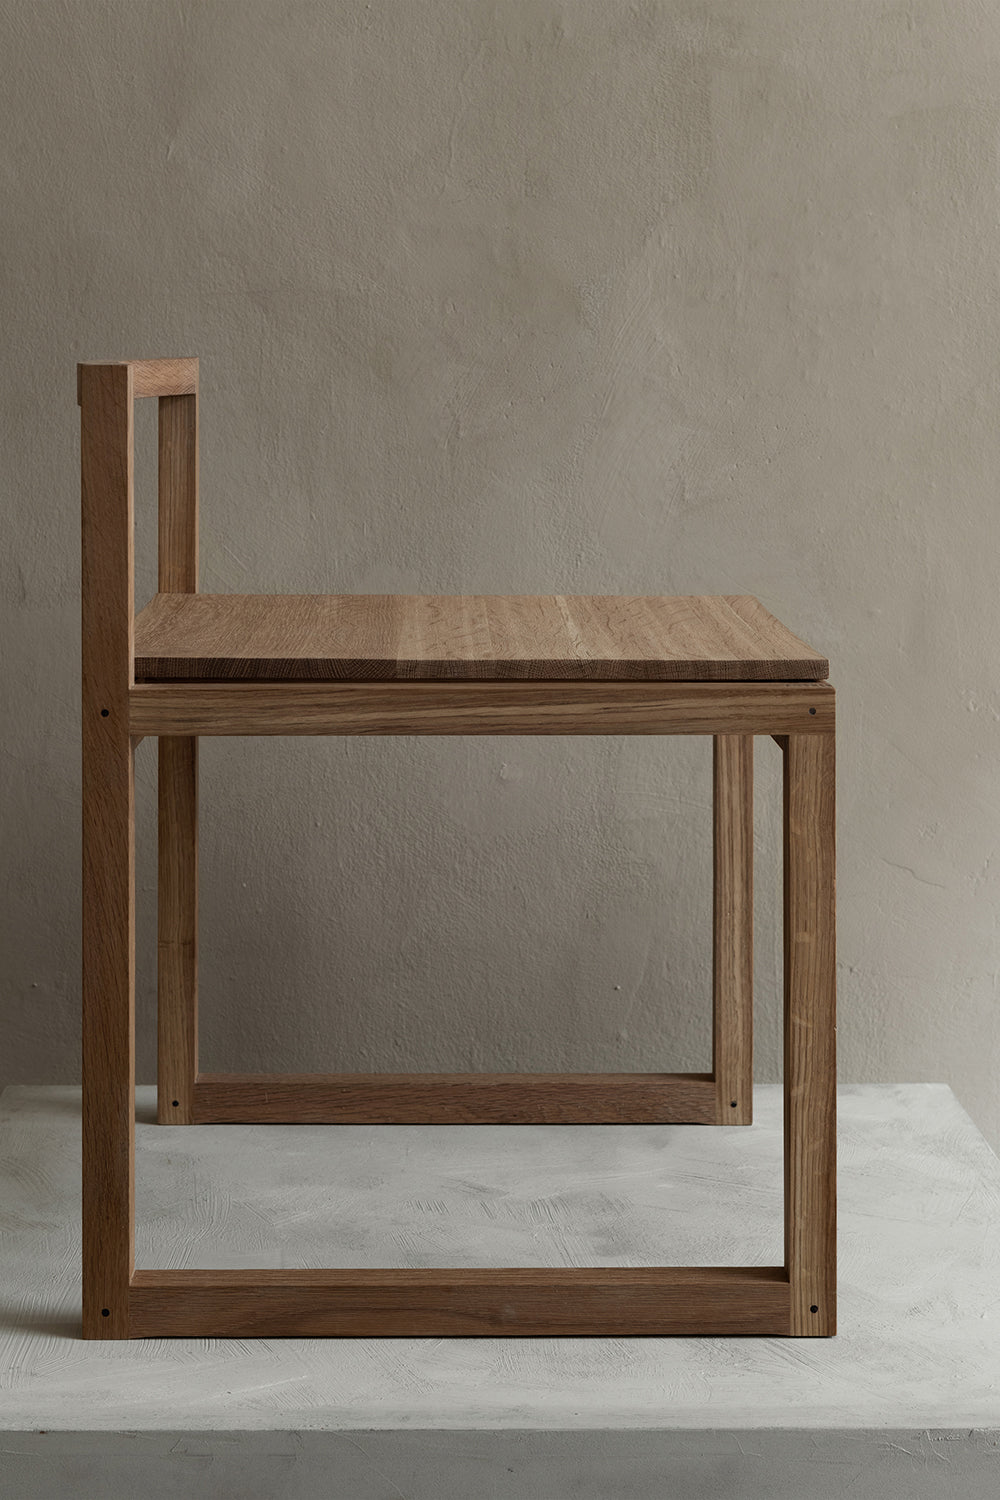 Outline Chair 02 by Bonni Bonne - an Oak wooden chair with Japanese style influence, sideview